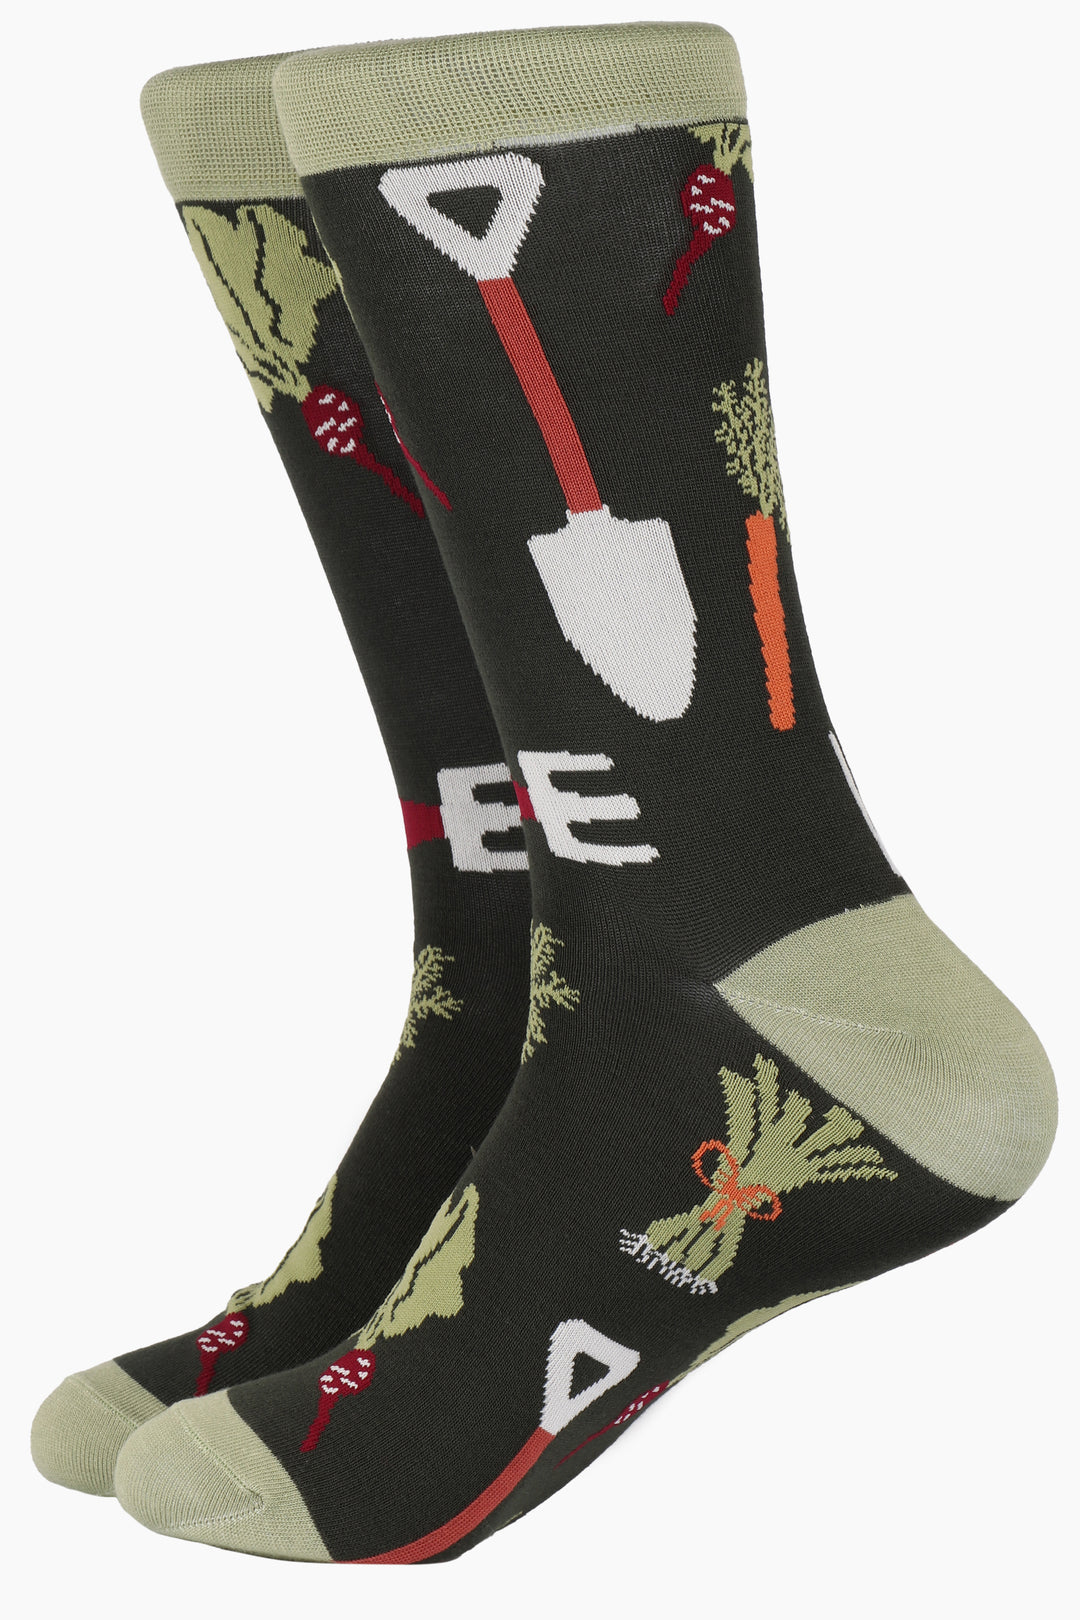 green bamboo socks with an green heel, toe and cuff with an all over pattern of garden spades, carrots and beets